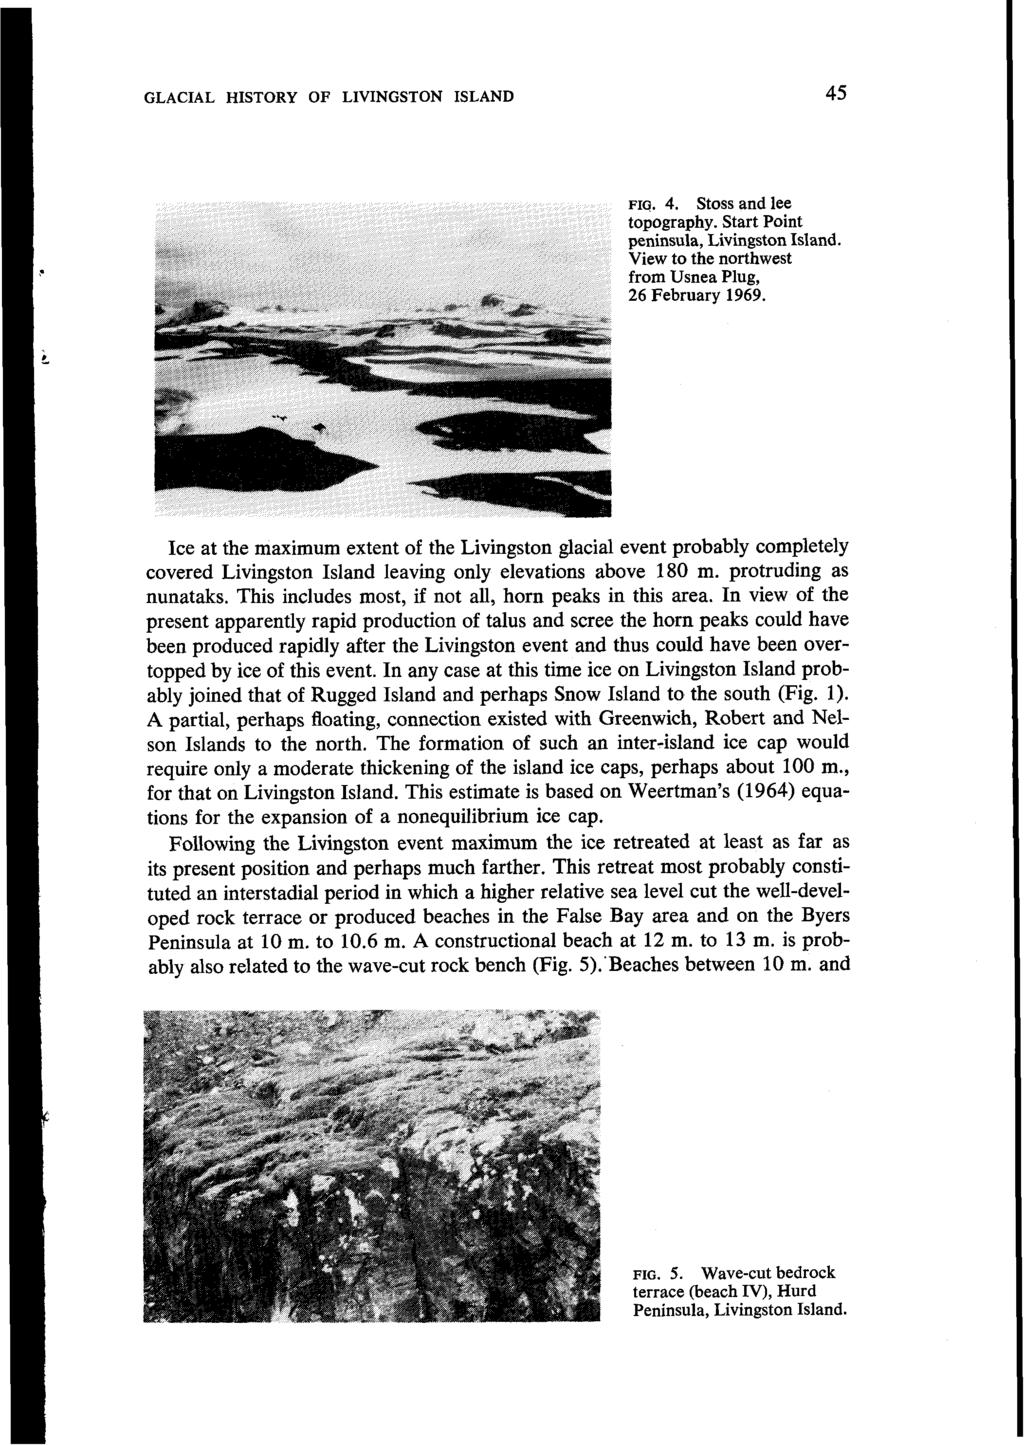 GLACIAL HISTORY OF LIVINGSTON ISLAND 45 FIG. 4. Stoss and lee topography. Start Point peninsula, Livingston Island. View to the northwest from Usnea Plug, 26 February 1969.